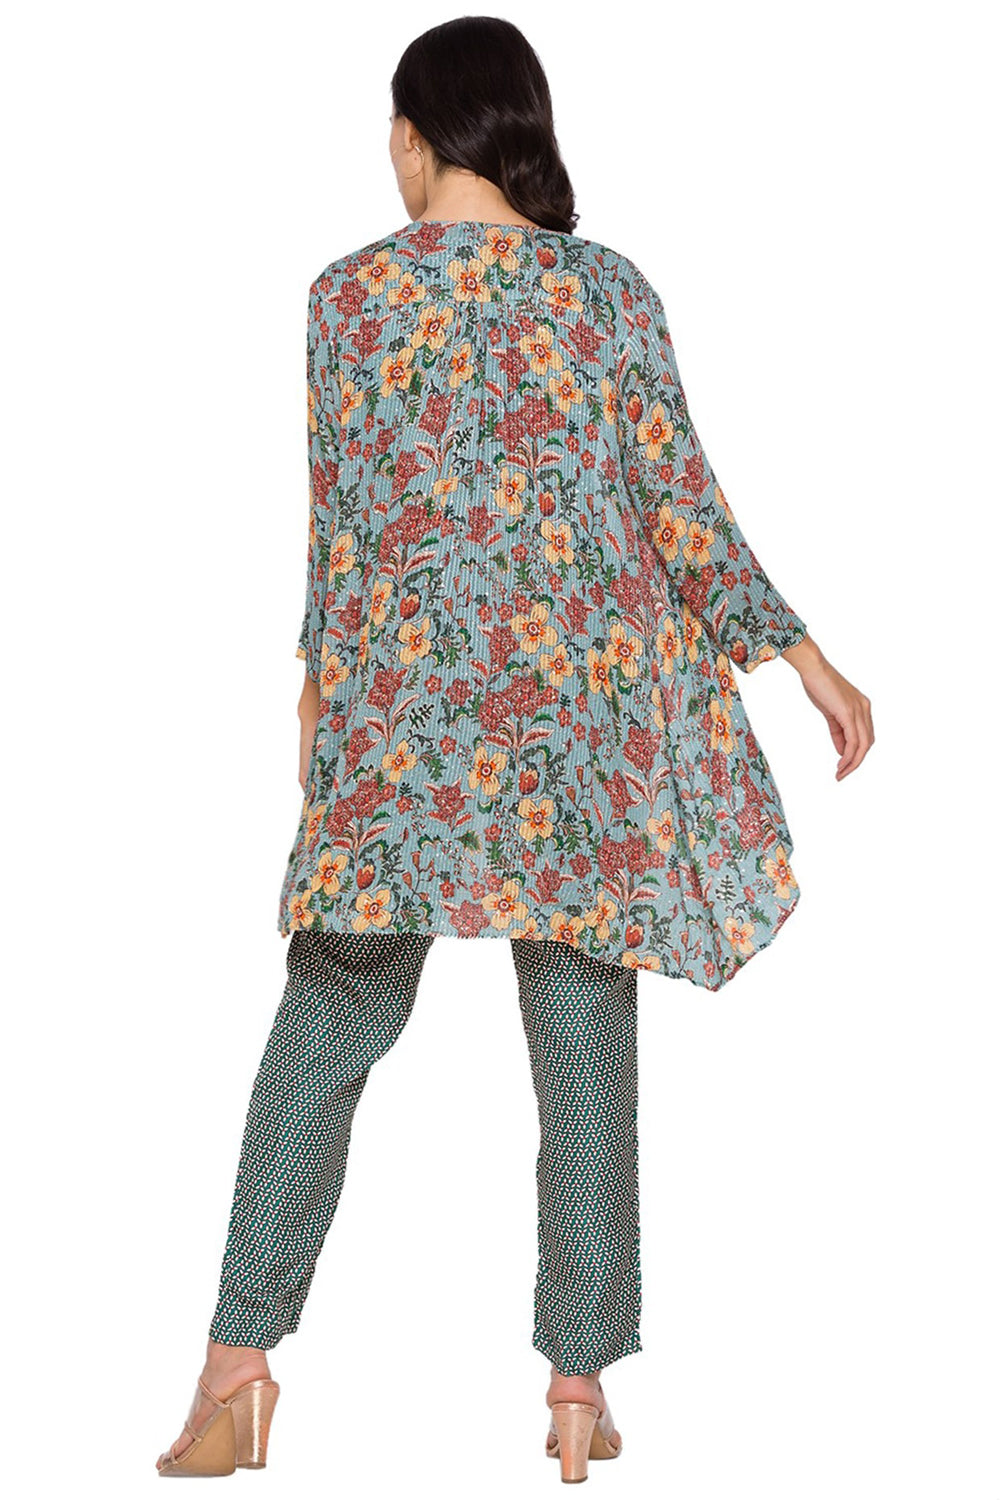 Azalea Printed Sequin Jumpsuit Paired With Asymmetrical Floral Printed Jacket